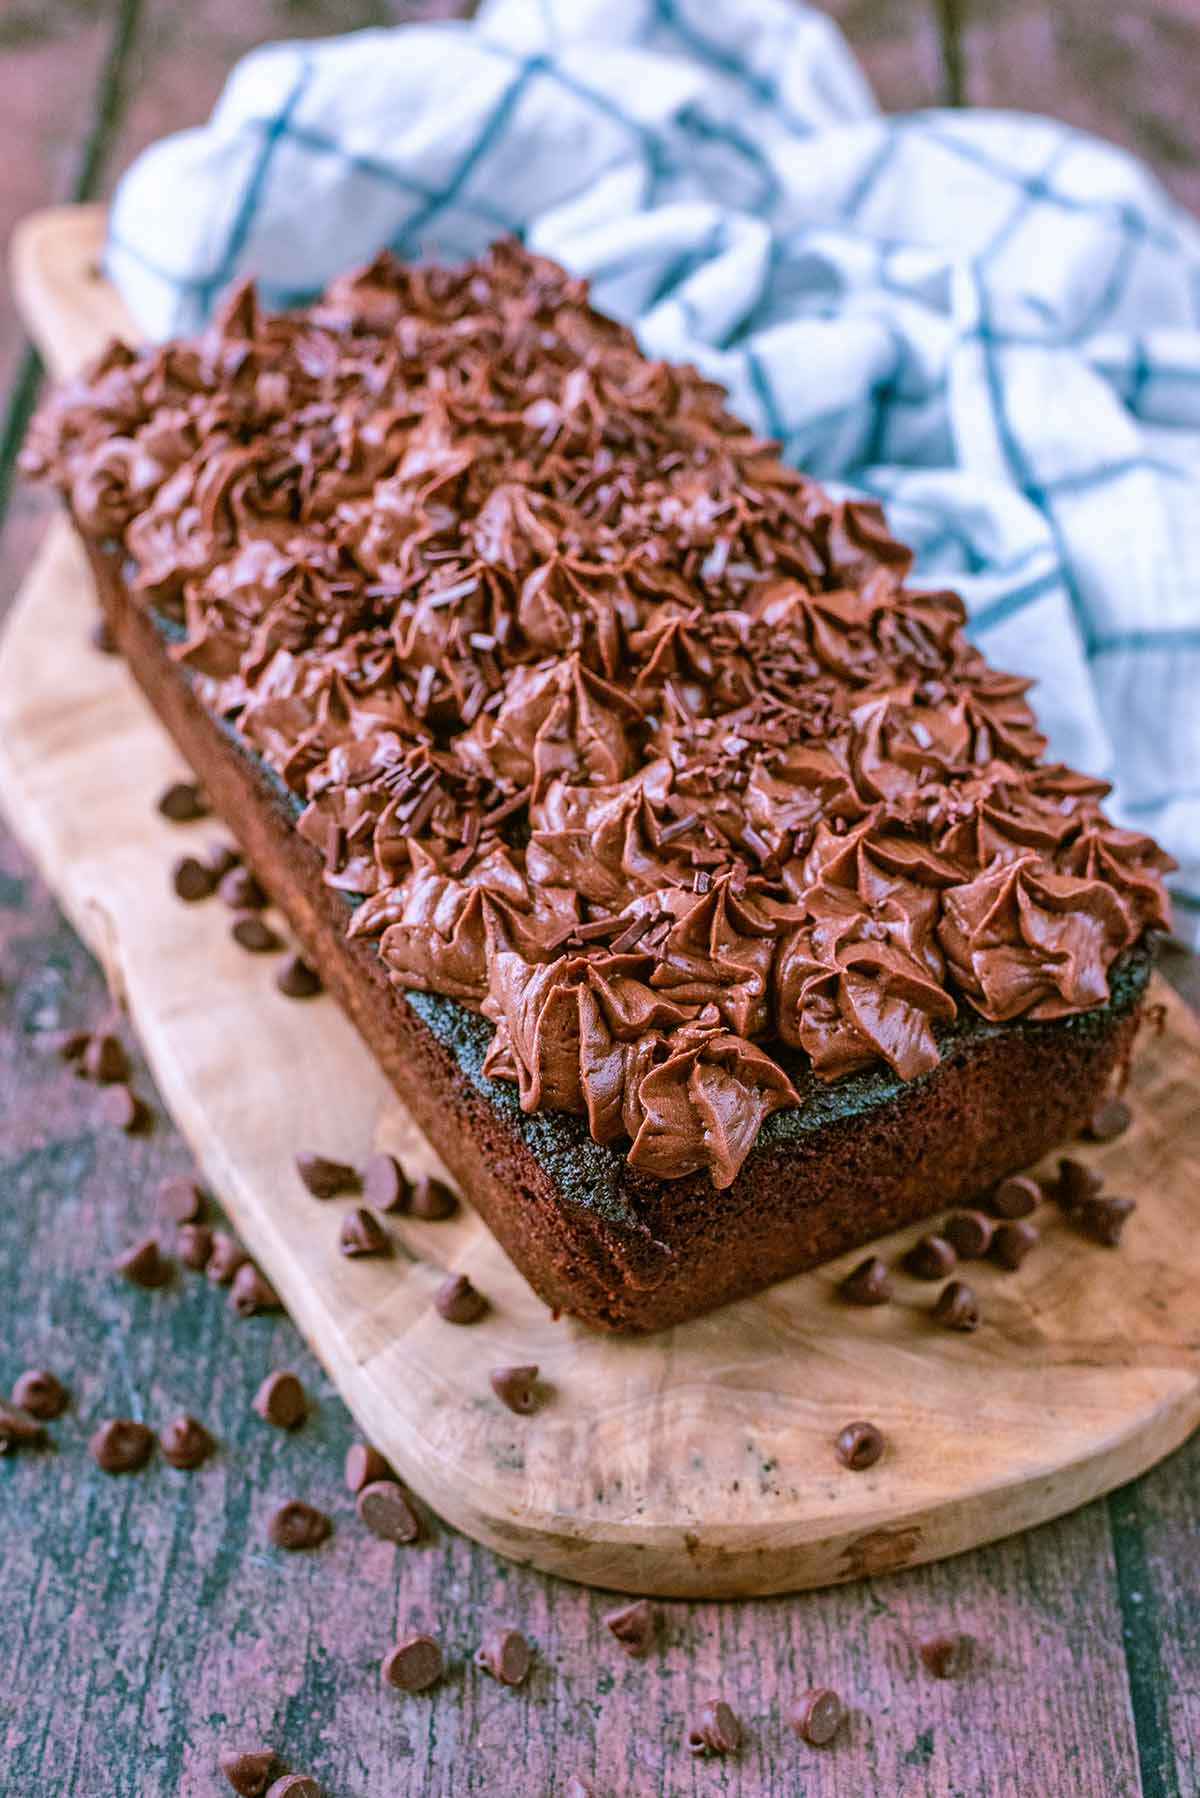 A rectangular chocolate cake topped with chocolate icing and chocolate sprinkles.